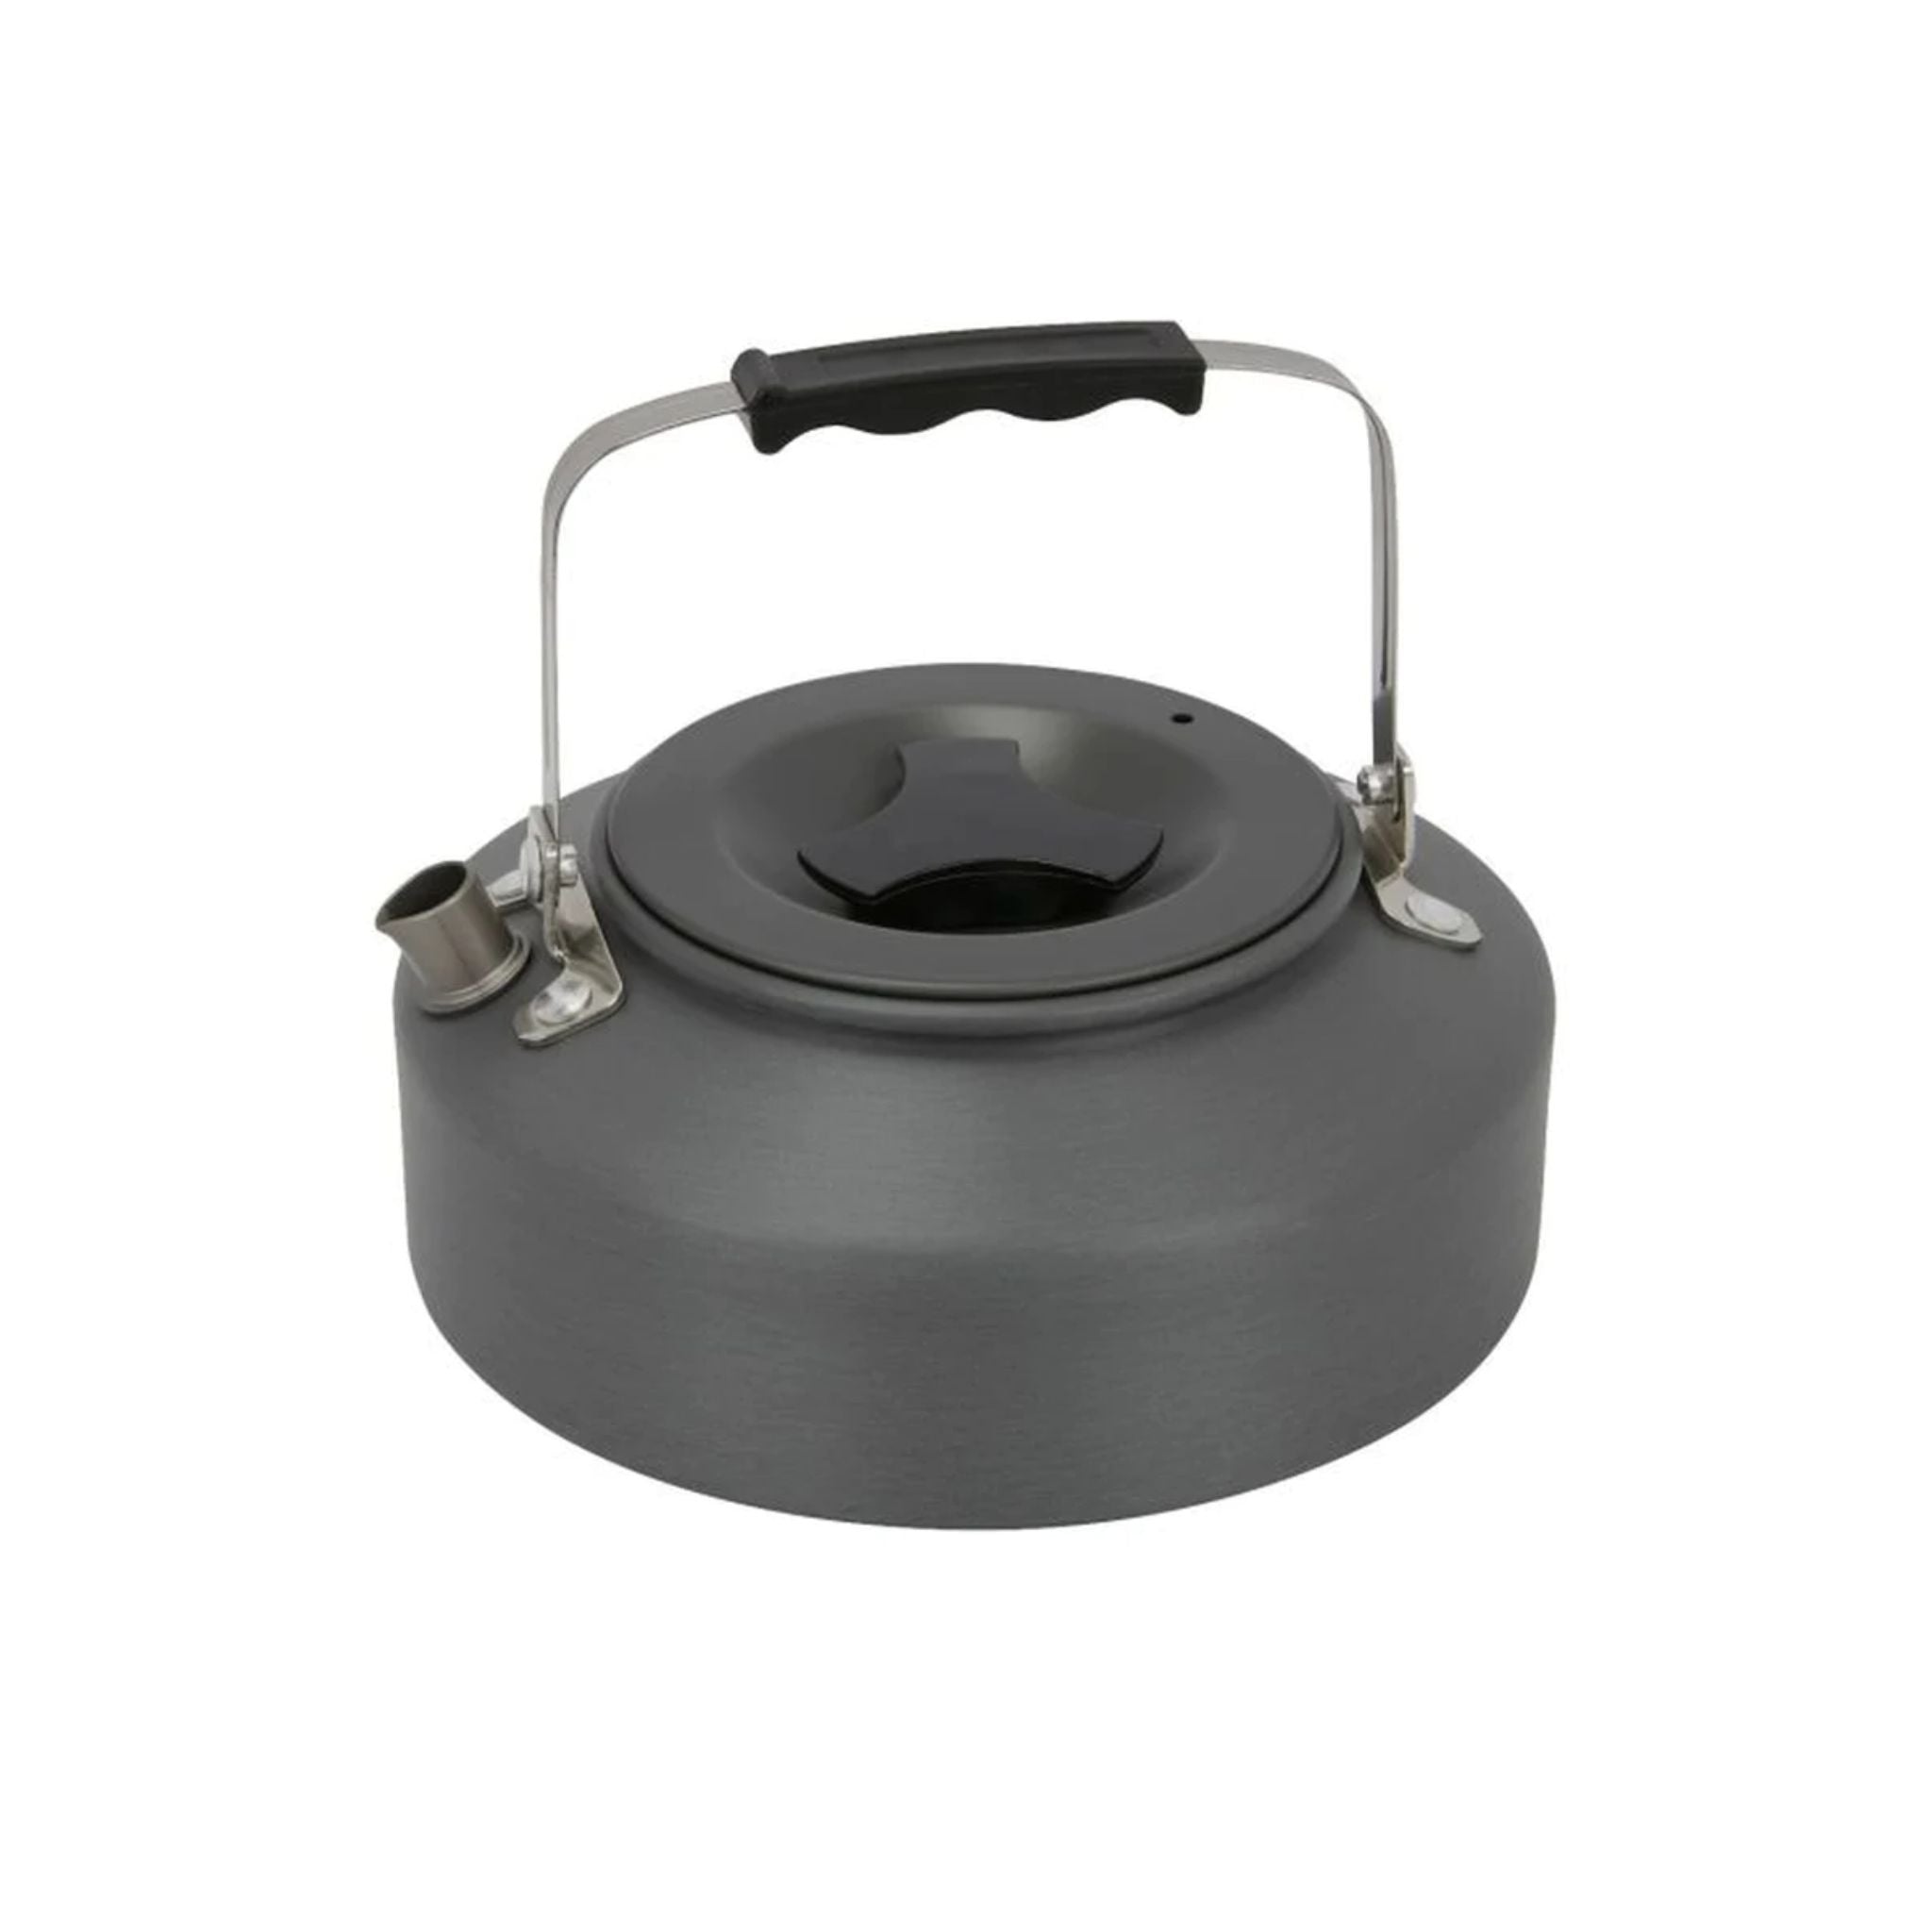 Go System Swift Camp Kettle | Go Systems | Portwest - The Outdoor Shop